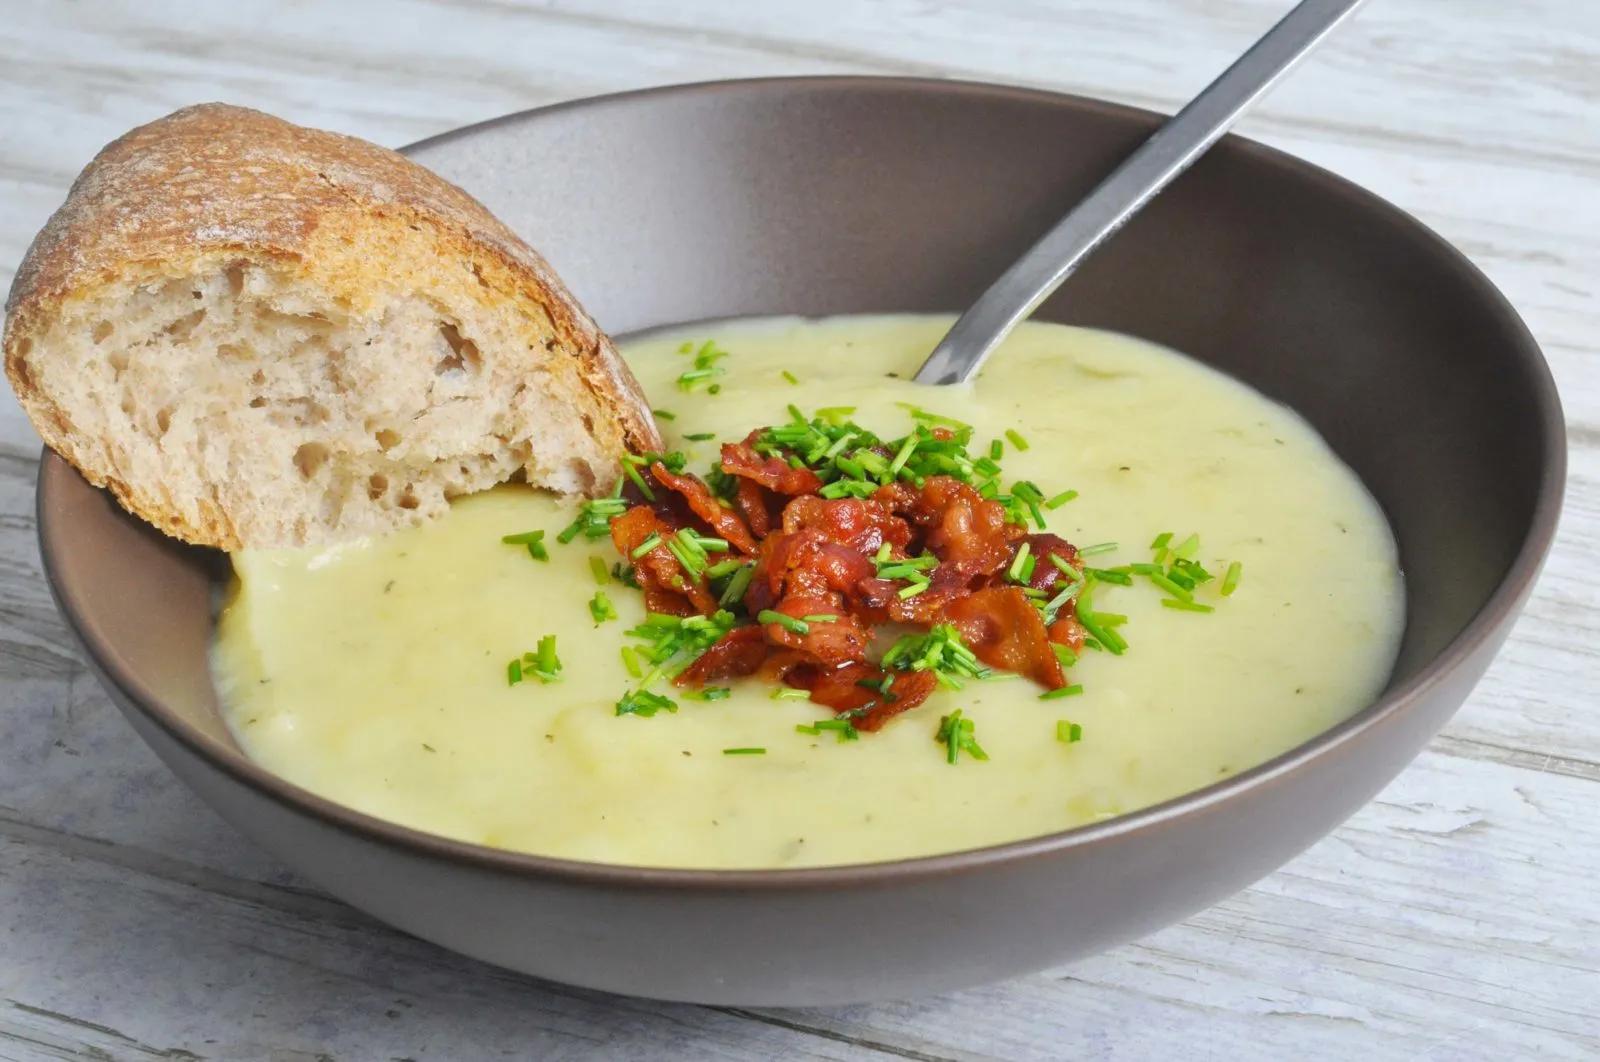 Classic potato soup with parma ham and wholewheat bread on the side